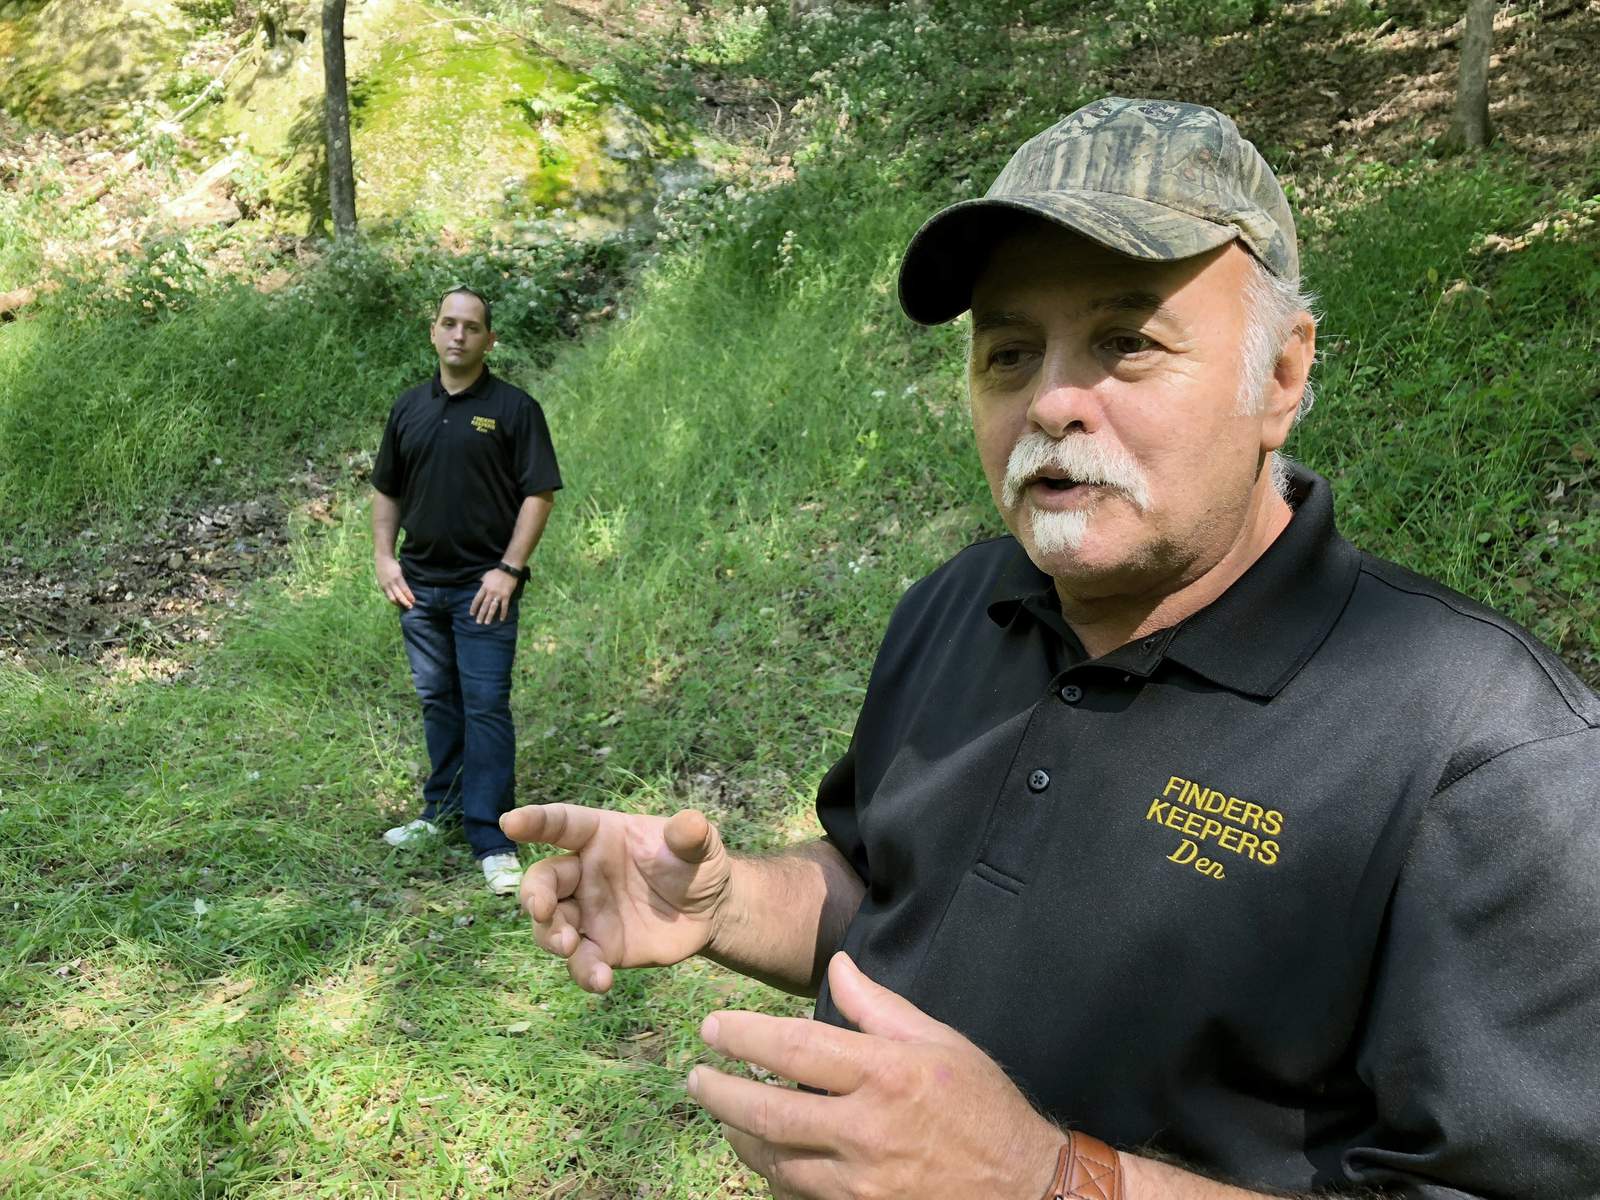 Emails: FBI was looking for gold at Pennsylvania dig site